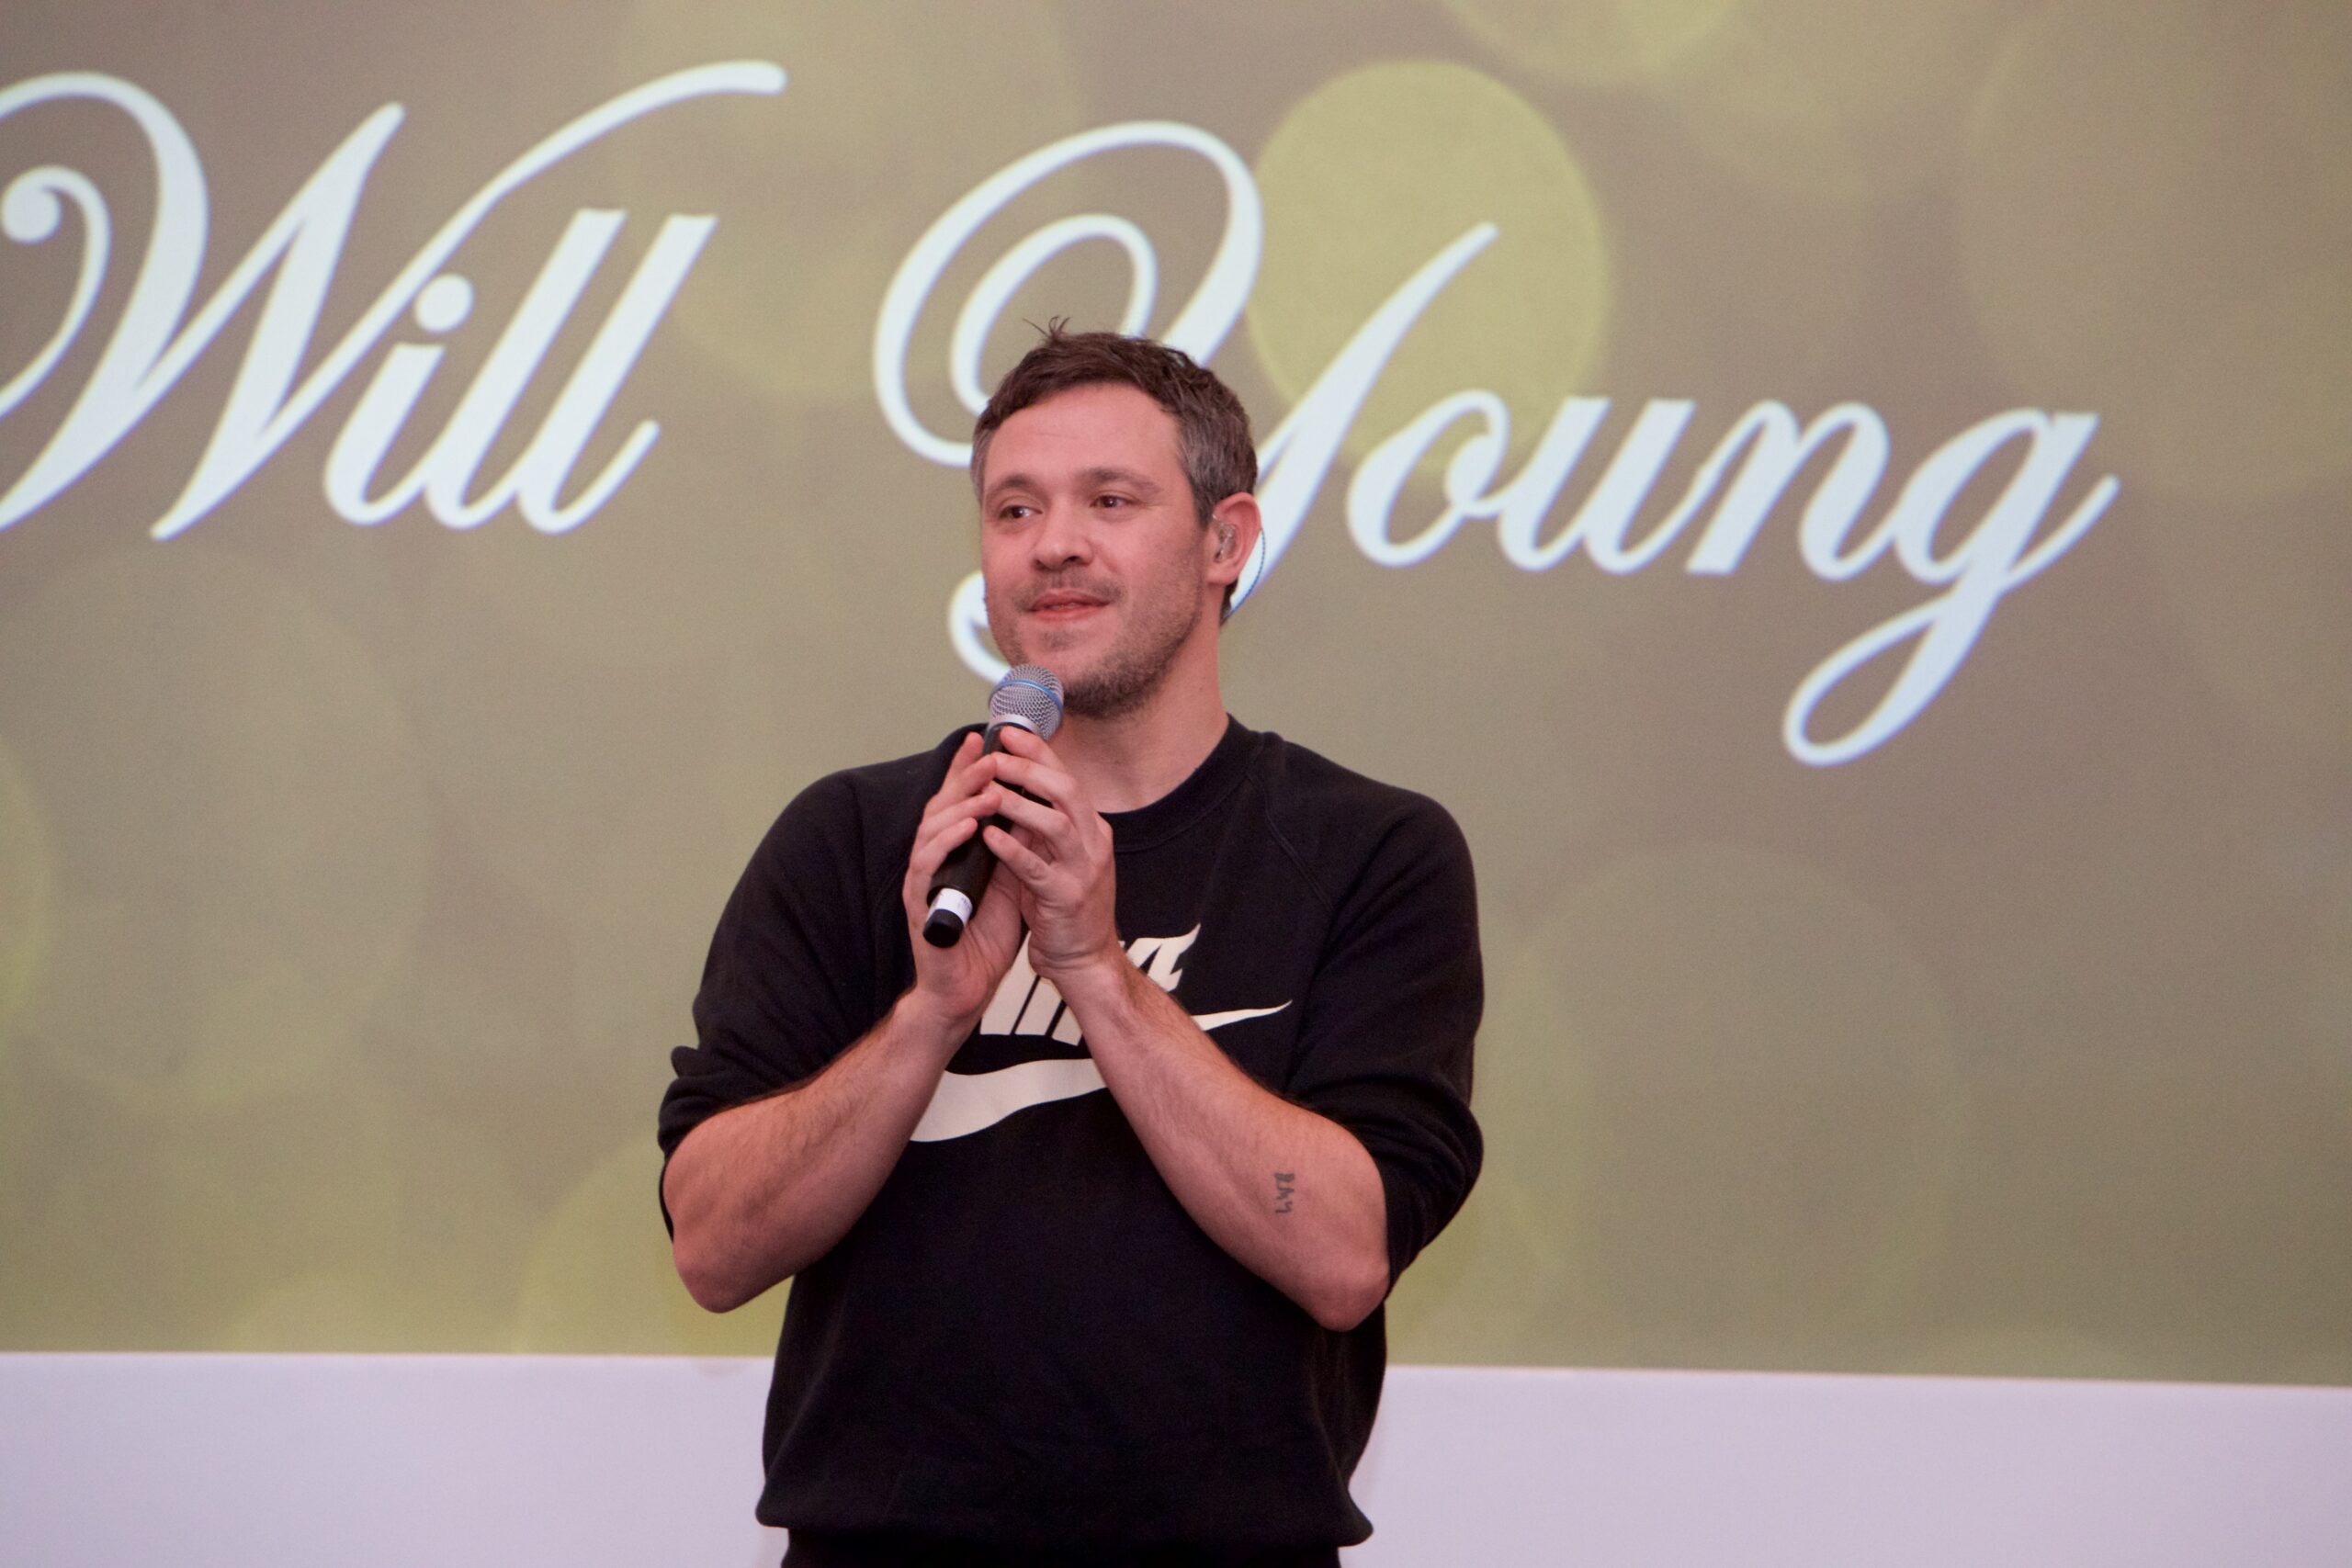 Will Young performed for guests scaled